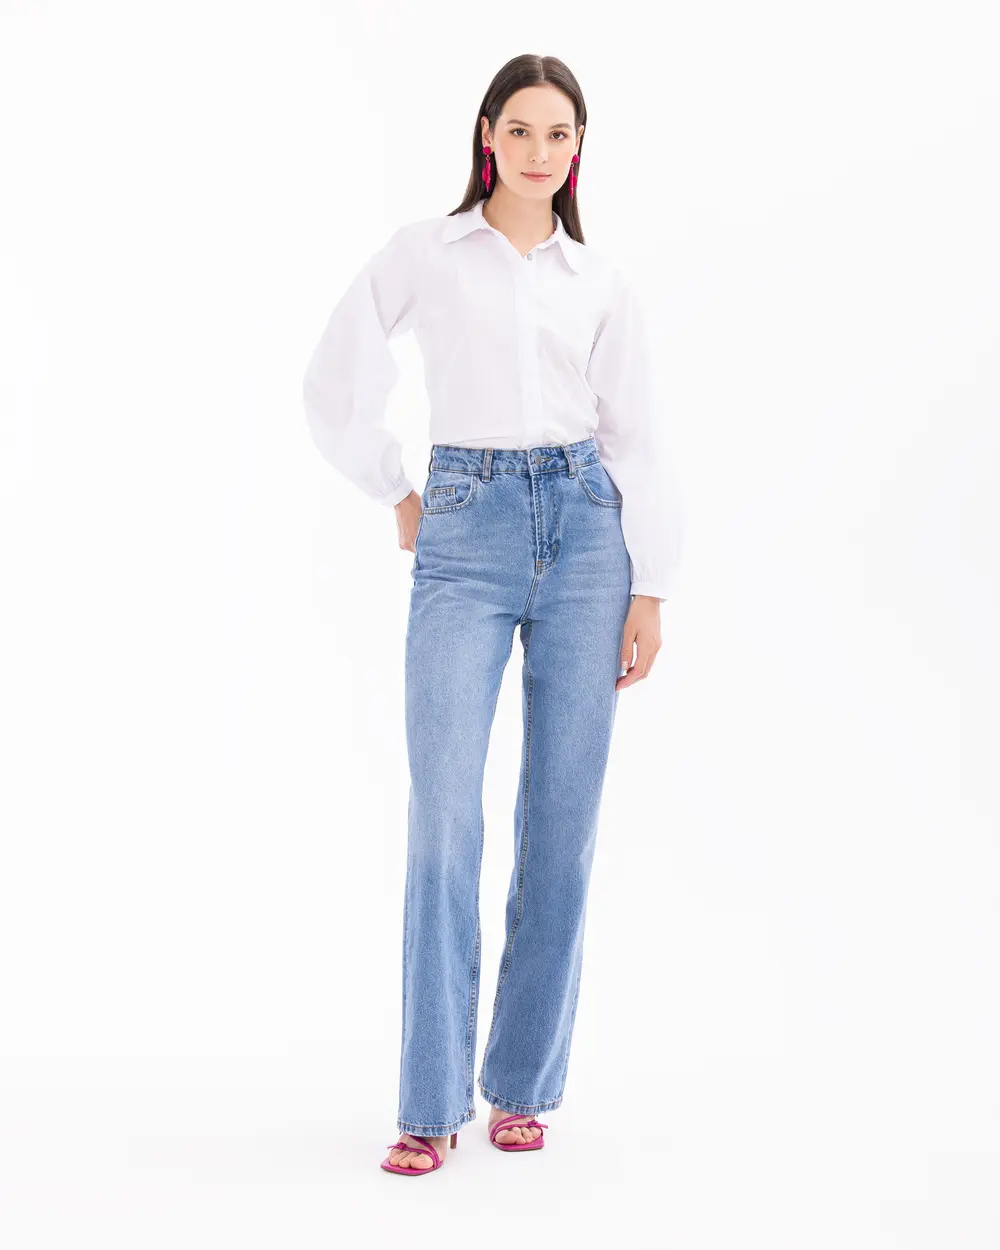 Piped Leg Buttoned Jean Pants